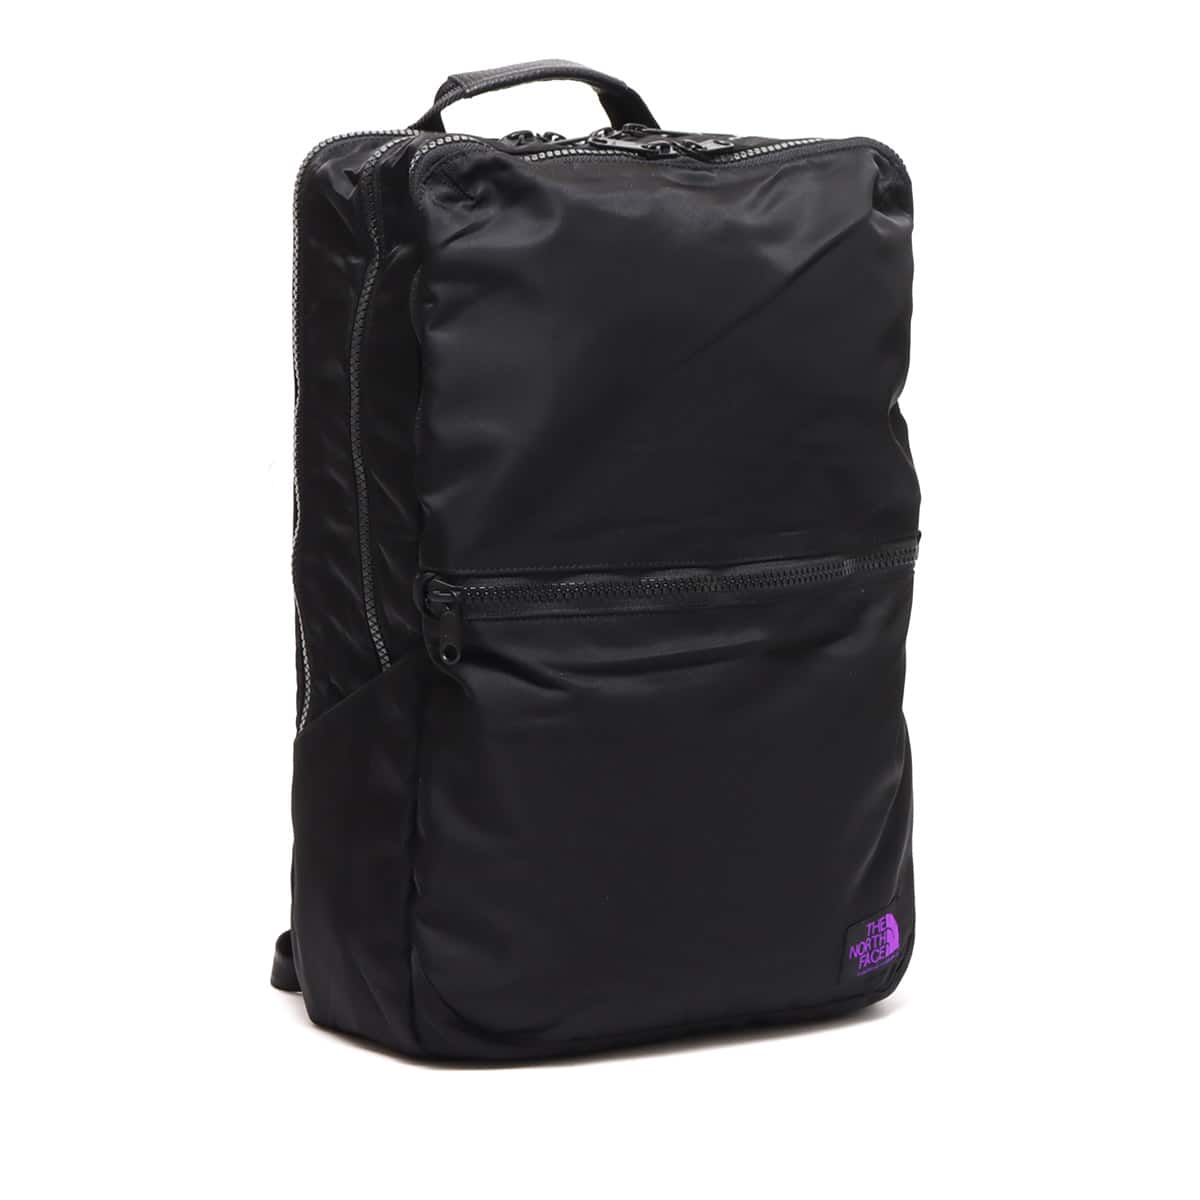 THE NORTH FACE PURPLE LABEL LIMONTA Nylon Day Pack Black 22SS-I